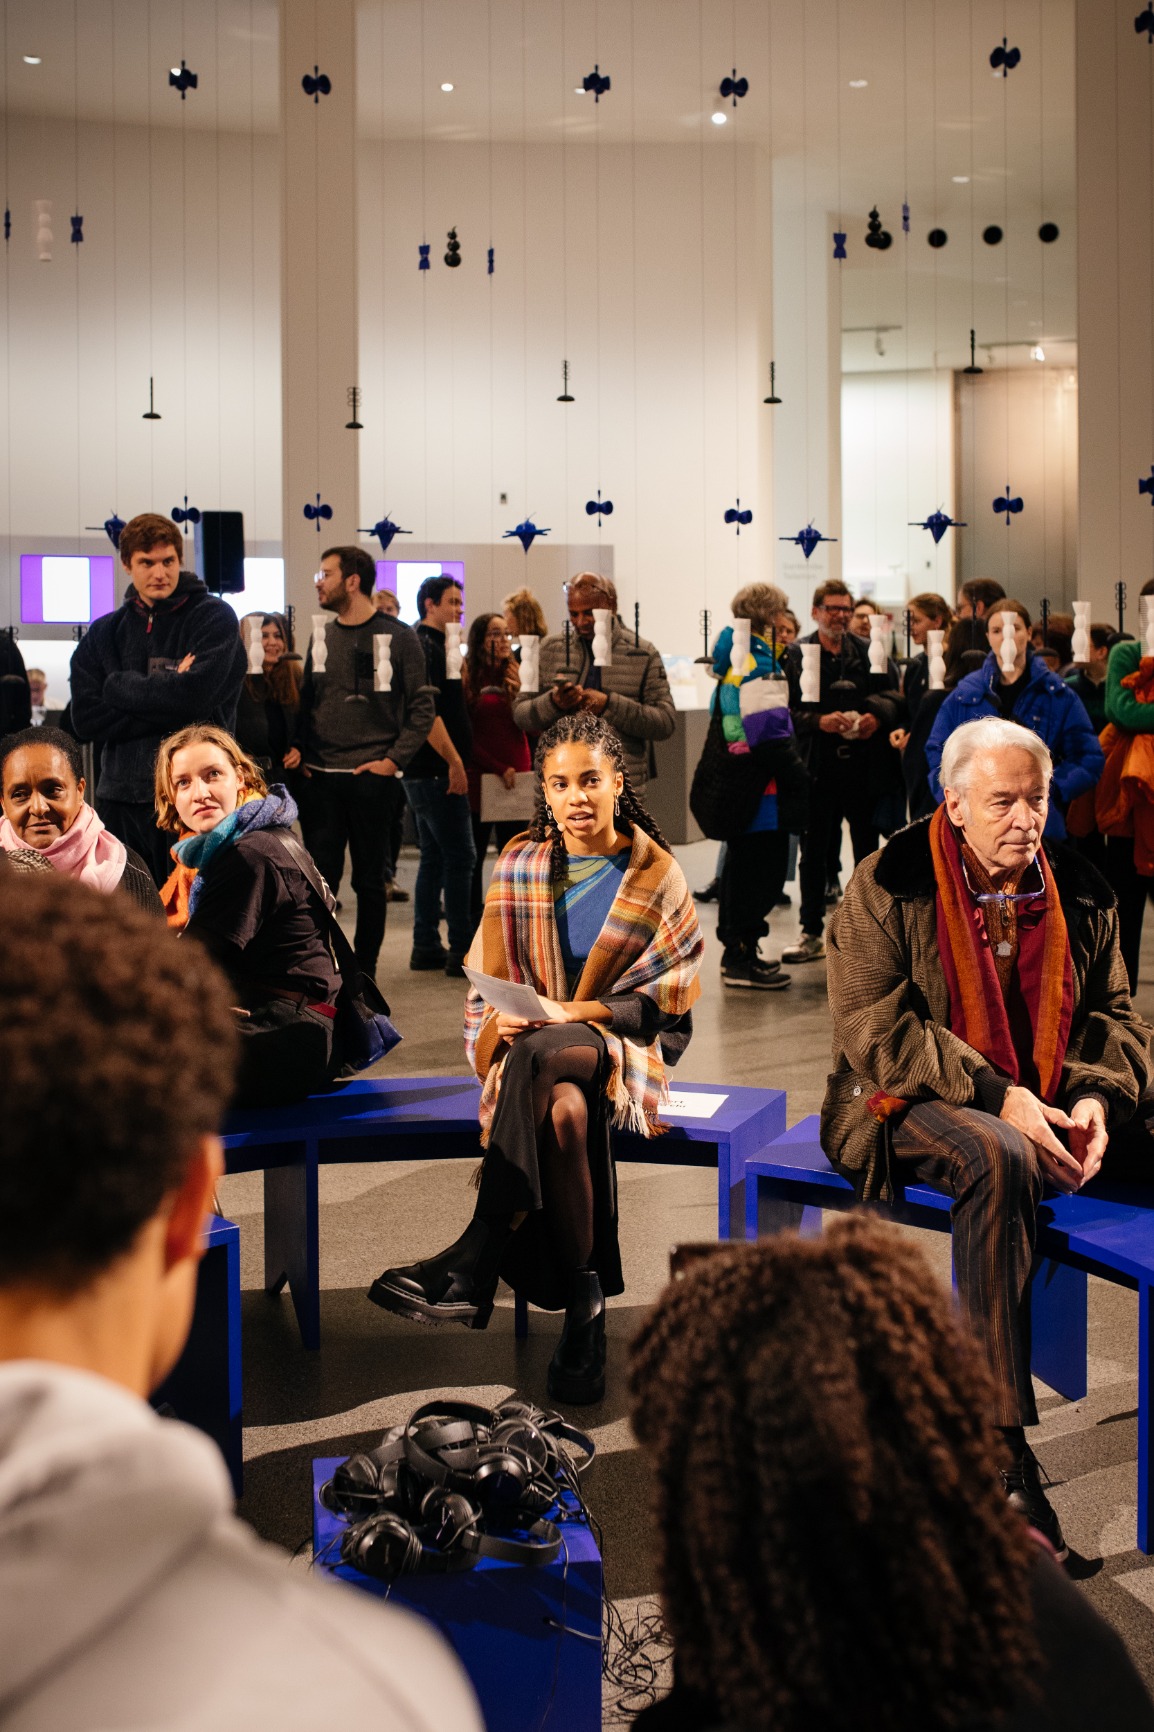 Photo of artwork. Artwork is a transparent beaded hanging curtain of 16m in a circular form creating an interior. The interior has blue benches that when put together form a circle. The curtain beads are blue, white and black. The strings are blue and pink. There are people sitting on the bench listening with earphones to a soundscape. There are people standing outside and inside the curtain. The image is taken during the opening evening where Abdé is loudreading.